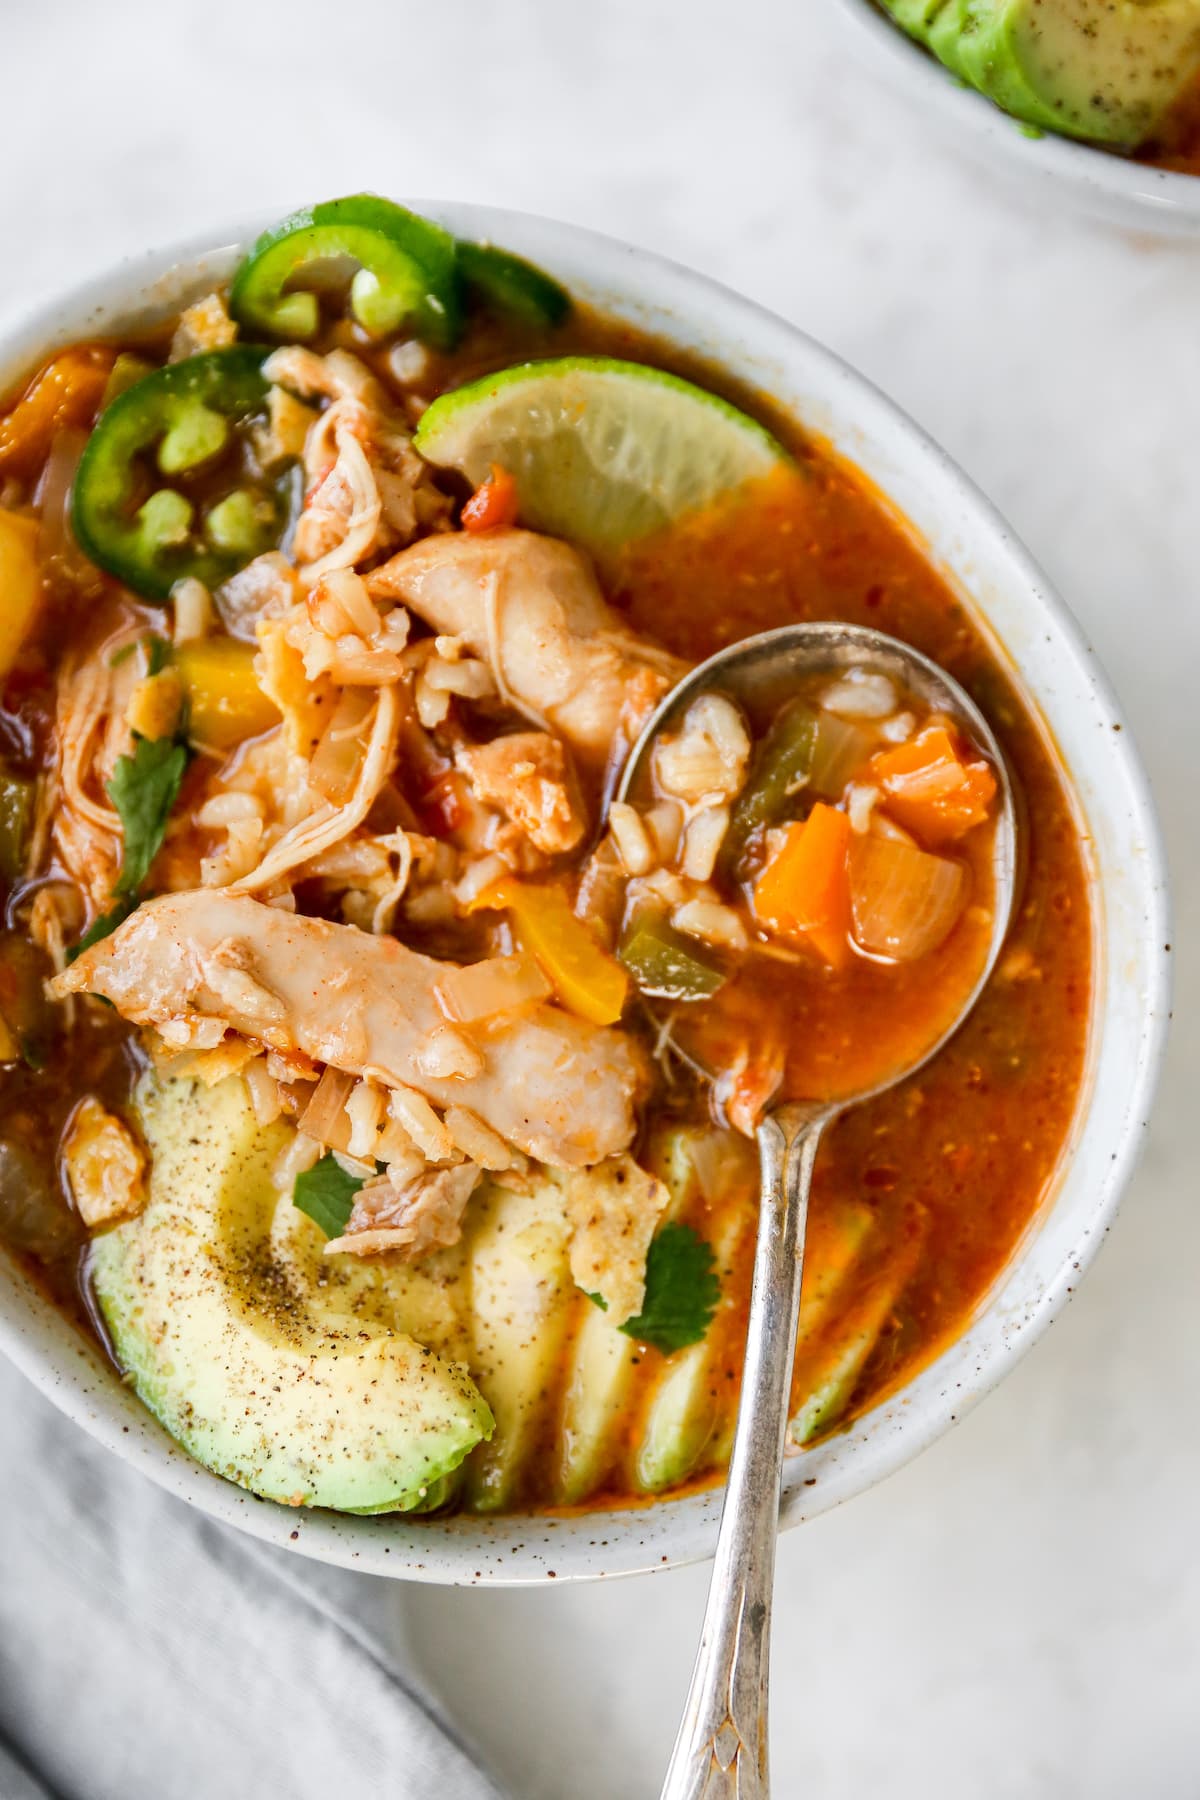 Bowl of chicken tortilla soup with avocado, line, jalapeno and chips as garnish. Spoon is in the bowl of soup.